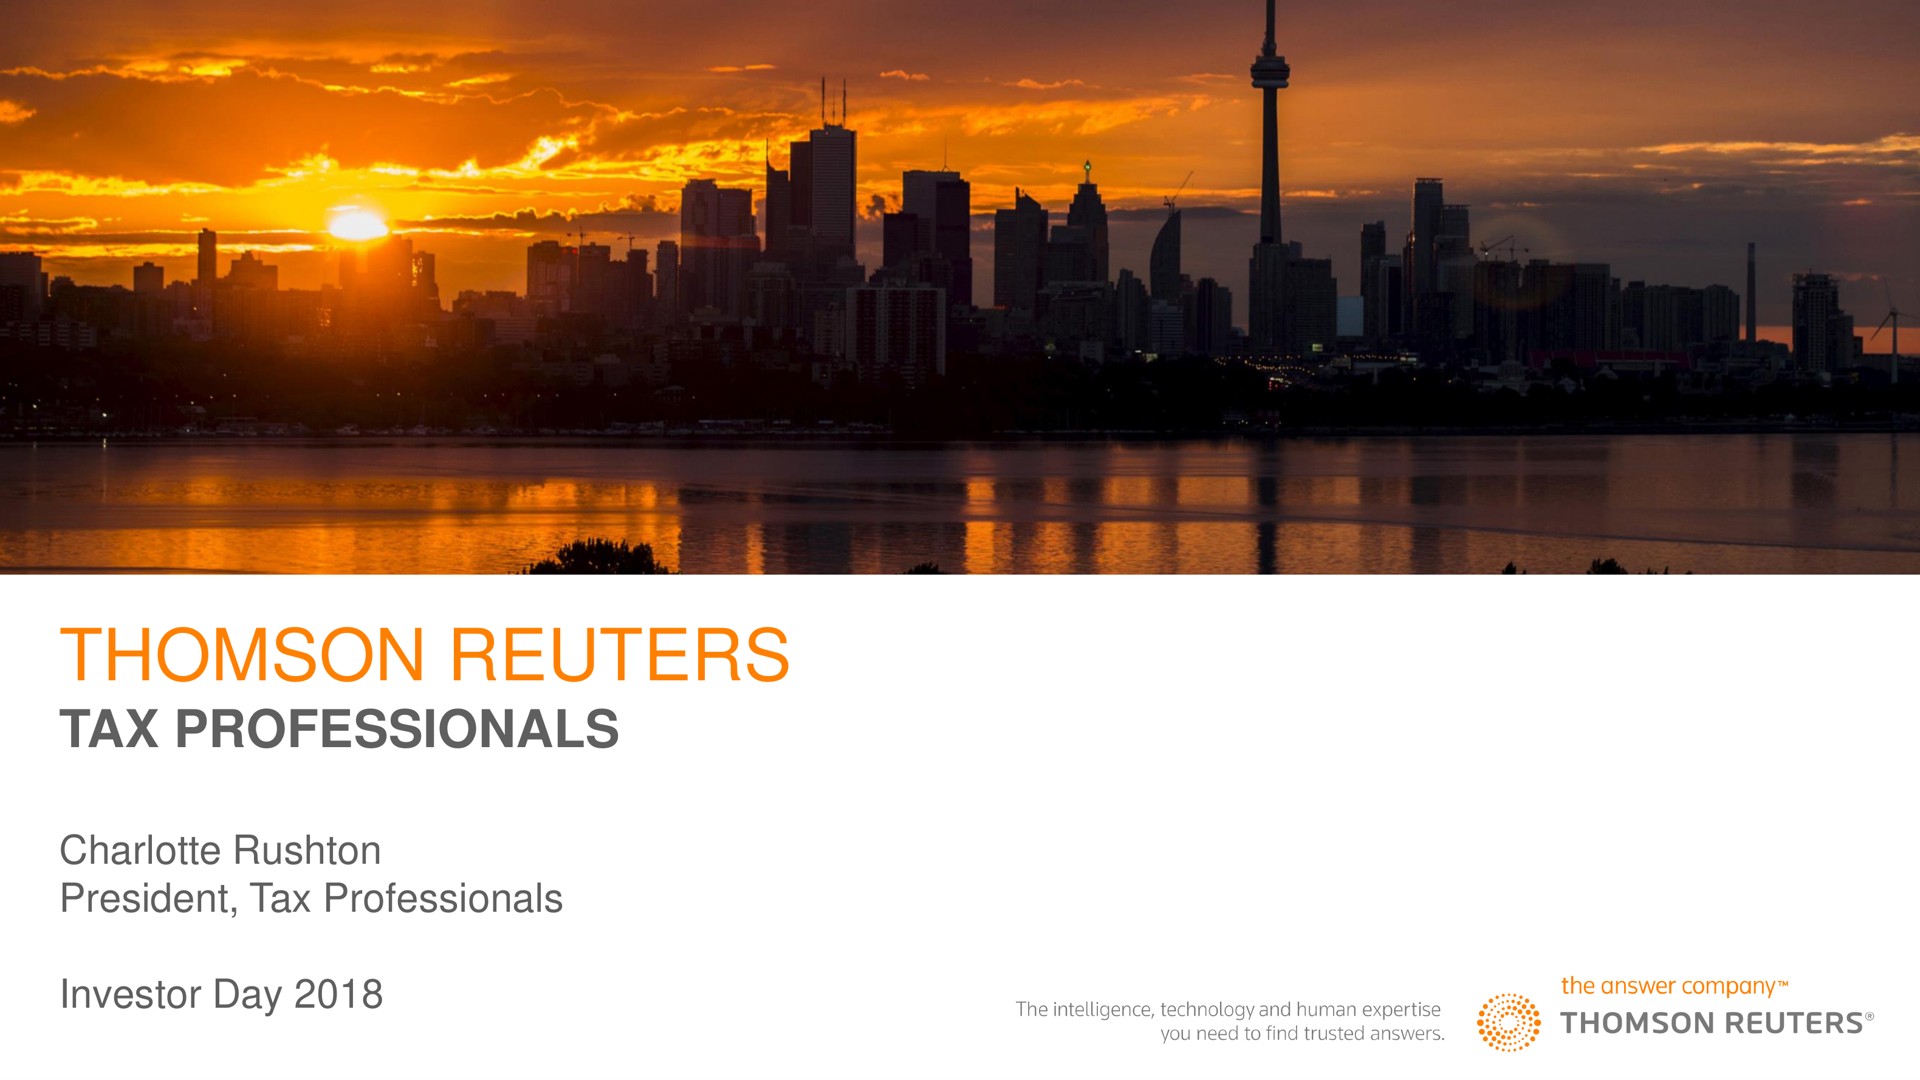 tax professionals president tax professionals investor day | Thomson Reuters